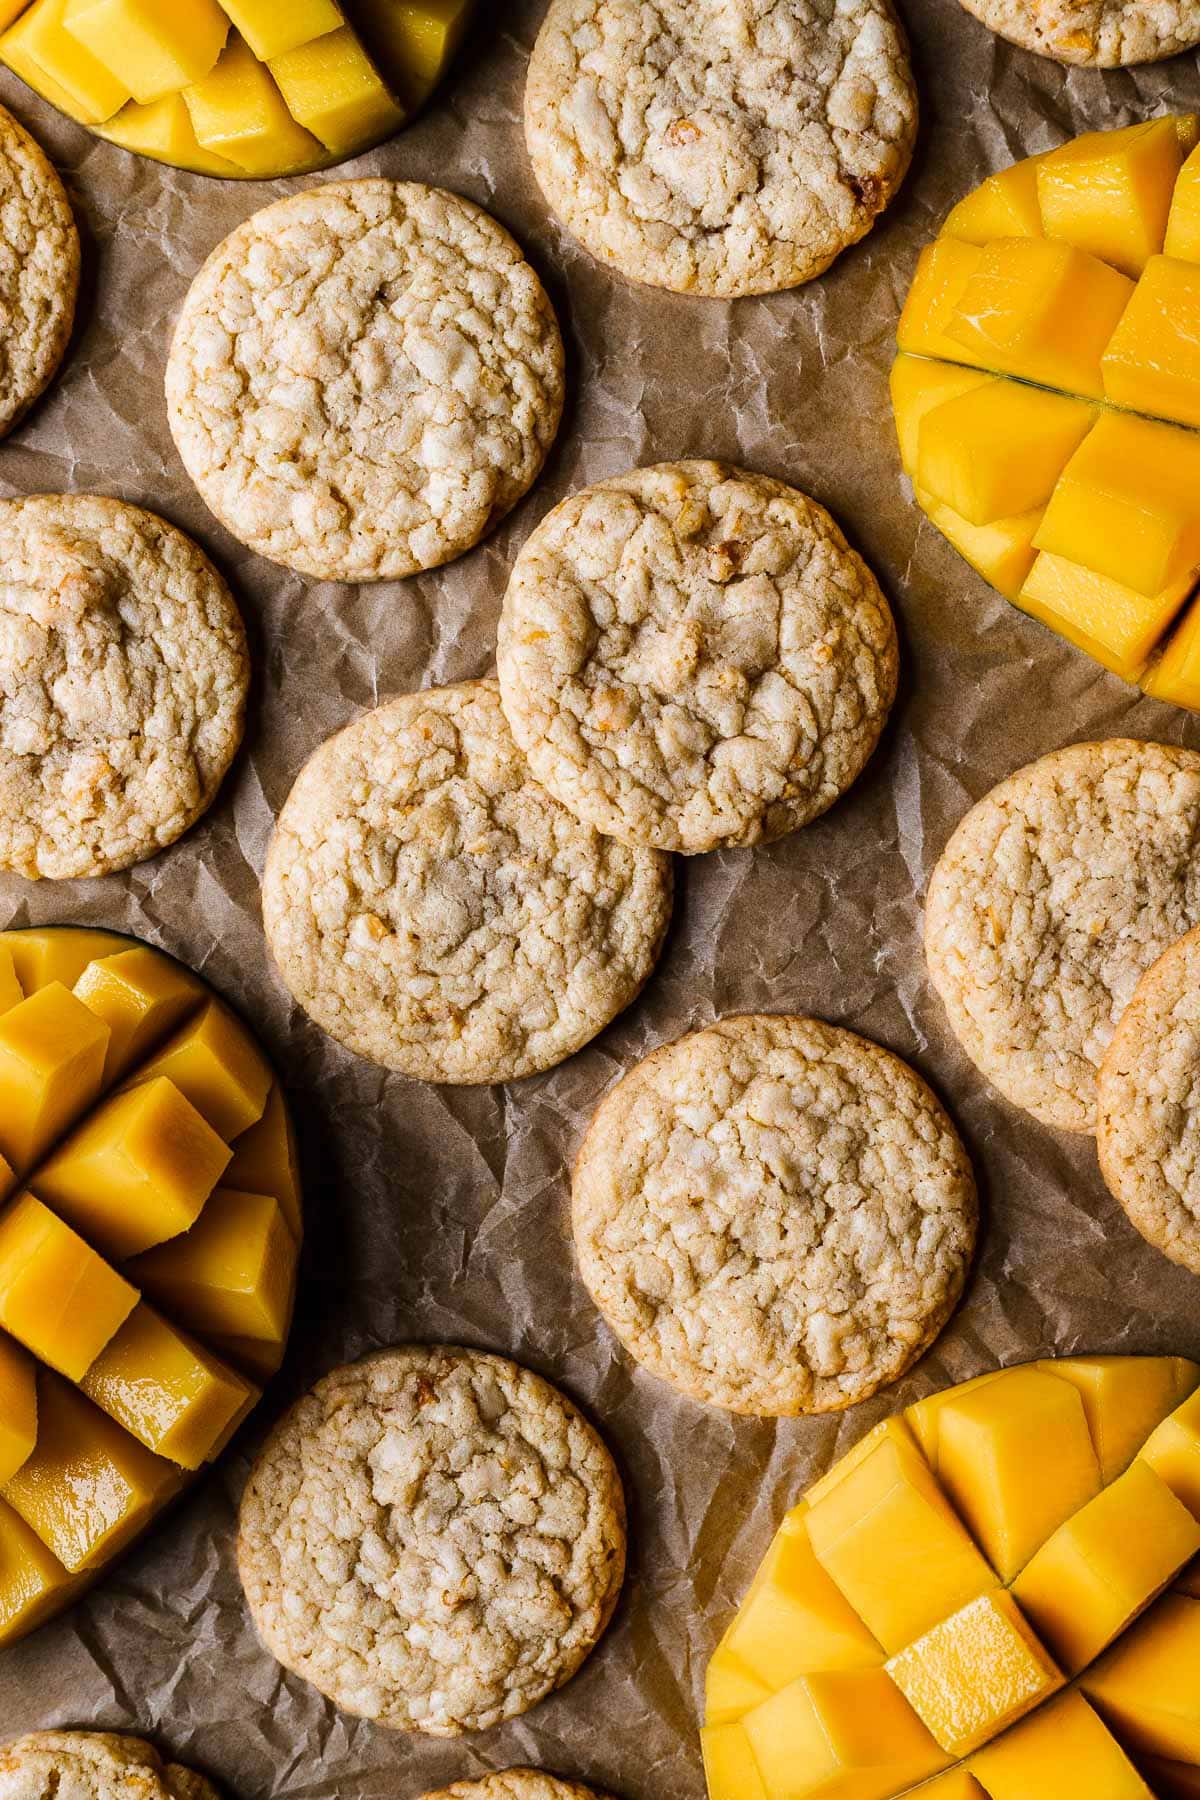 Cookies with sliced mangos peeking into the image.